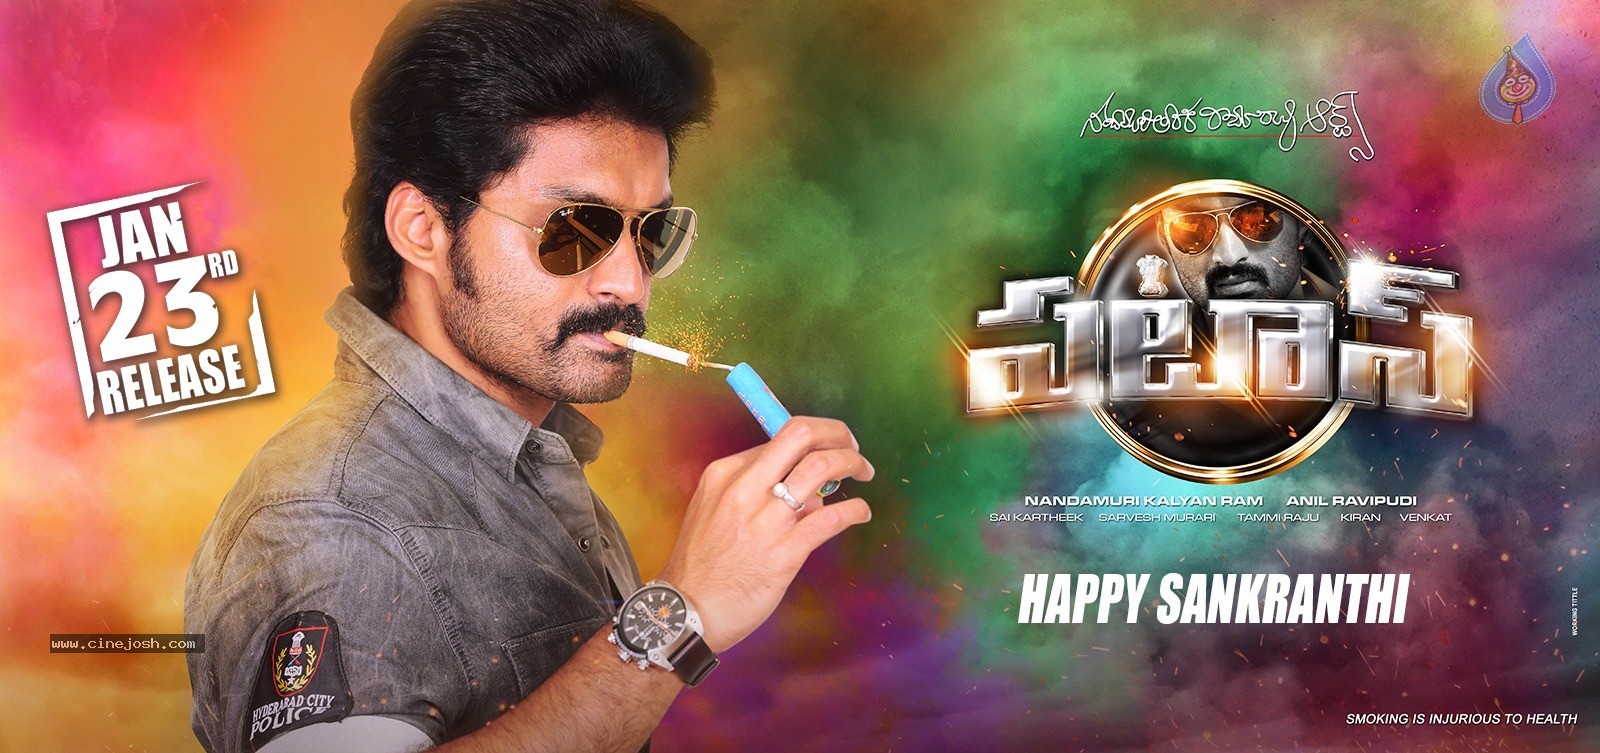 Patas Movie Release Date Posters - 7 / 7 photos